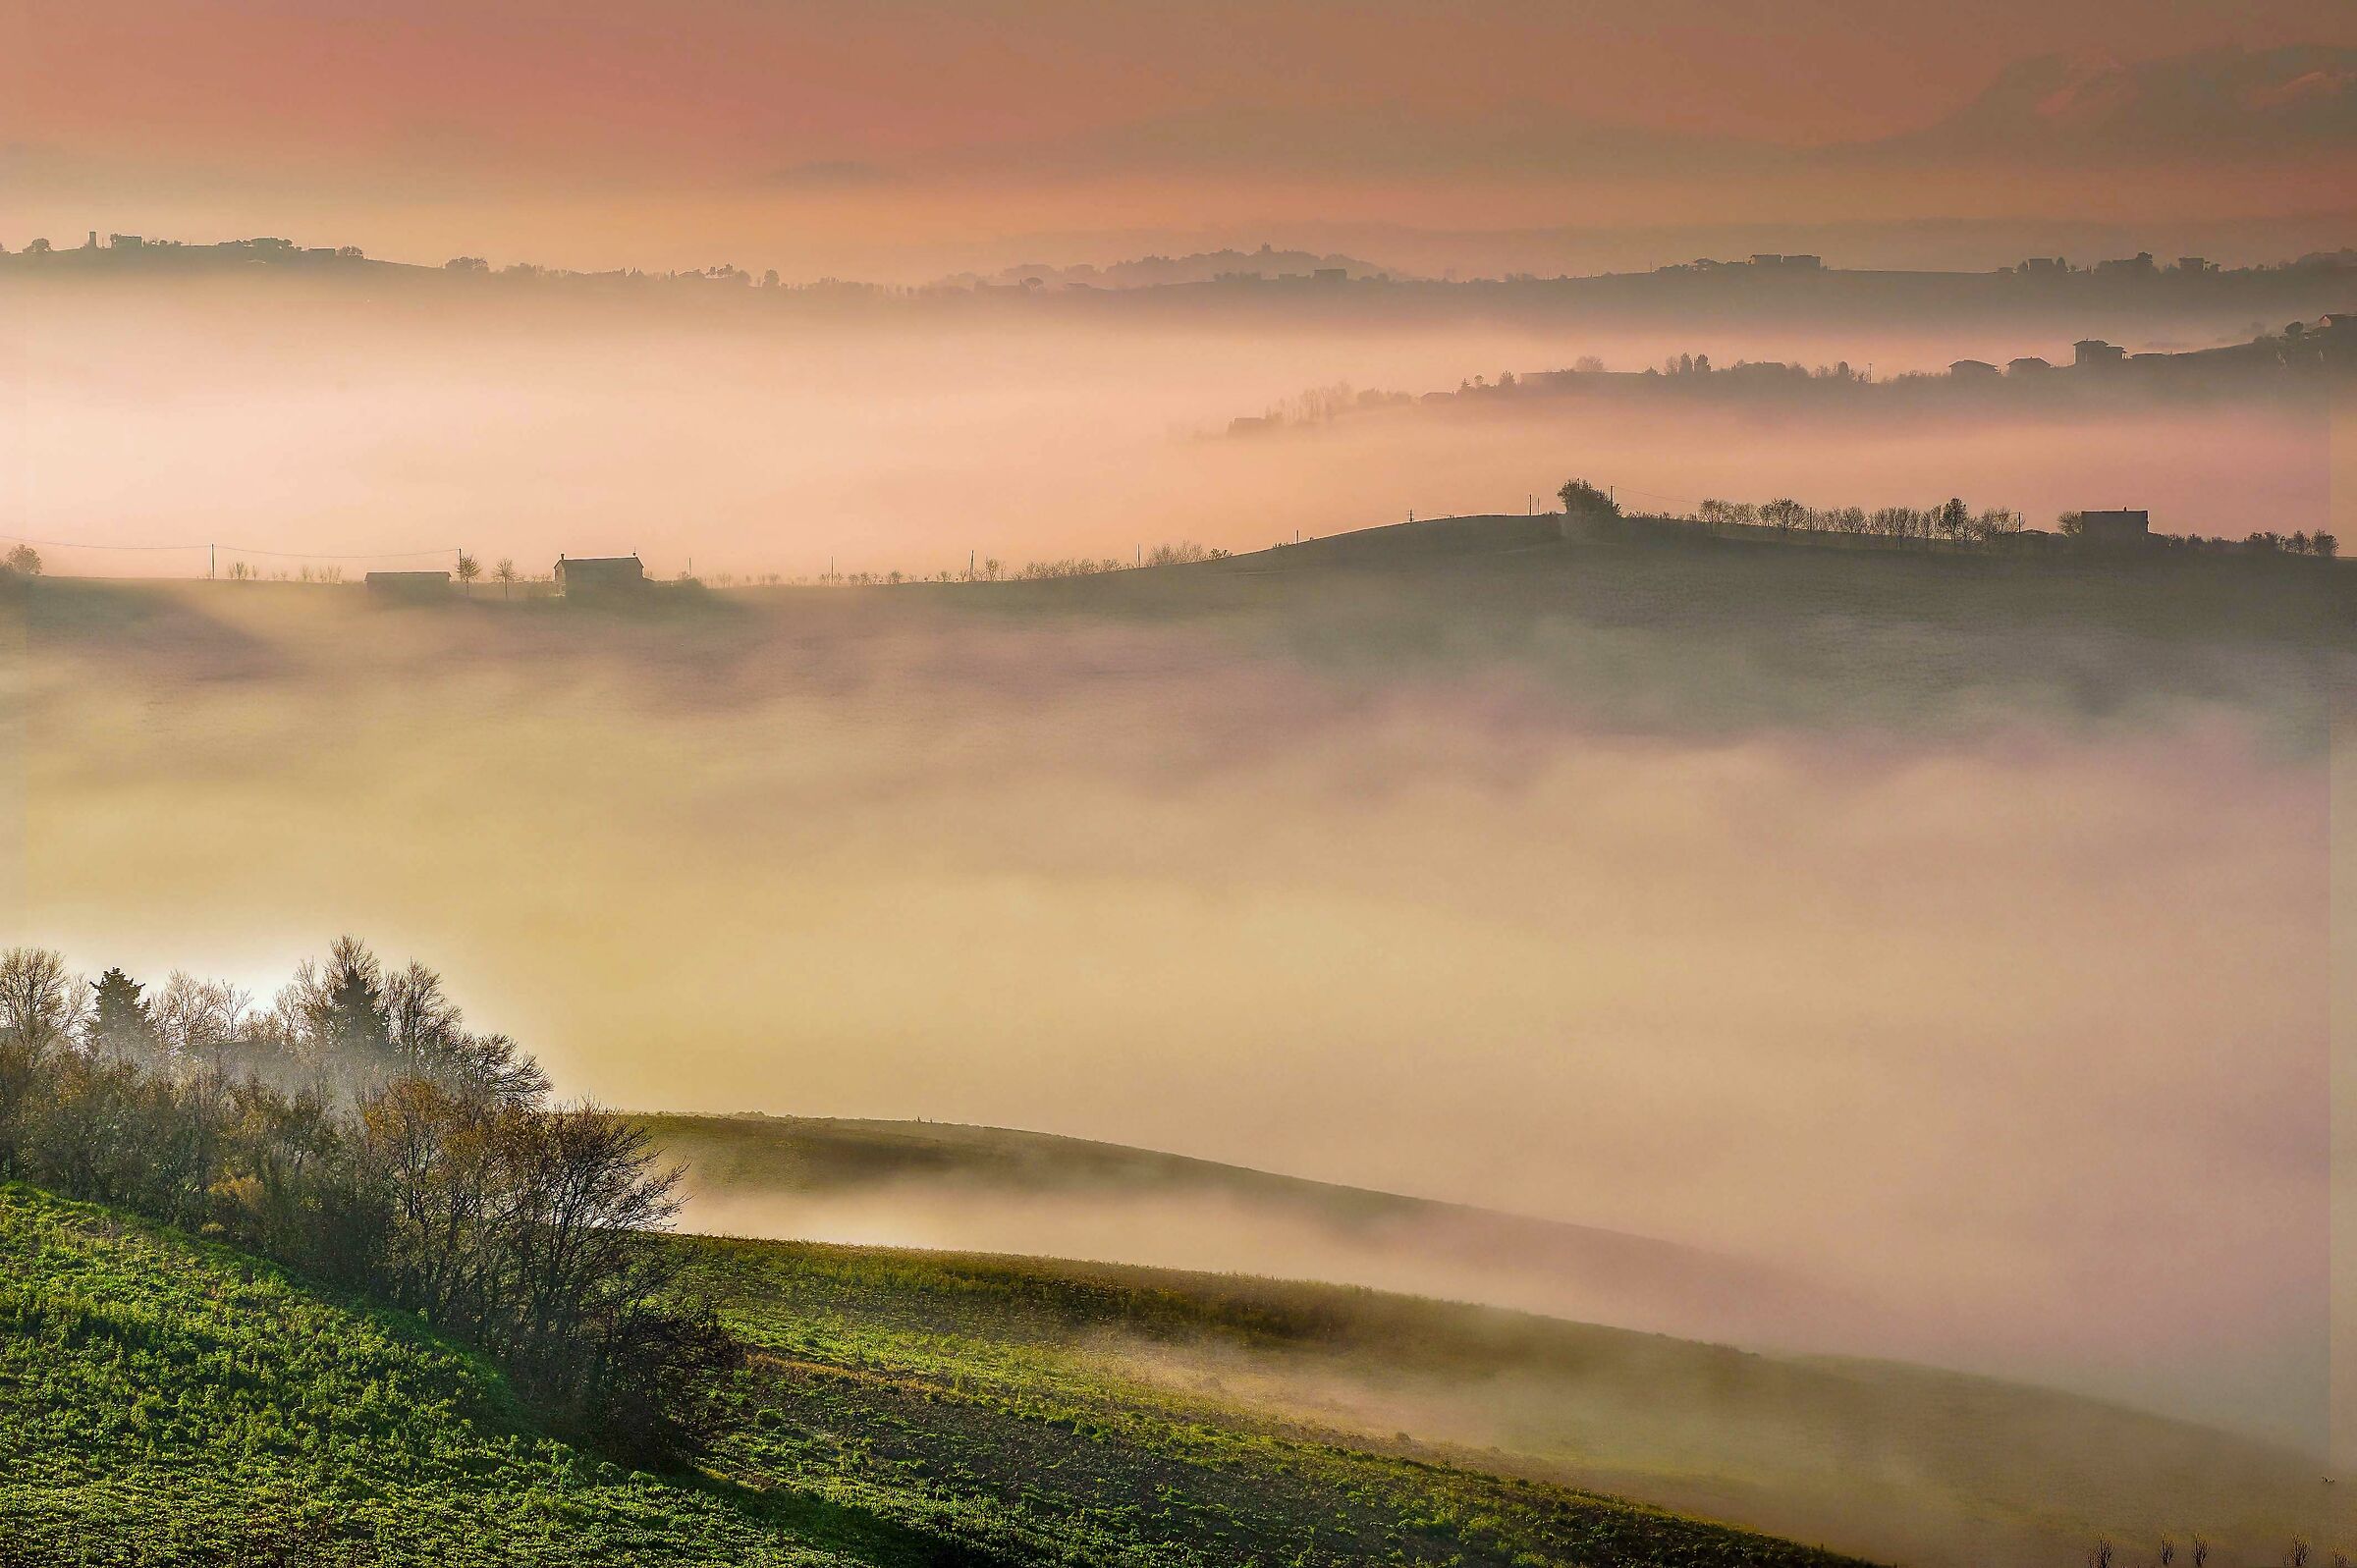 Landscapes of the Marche region...